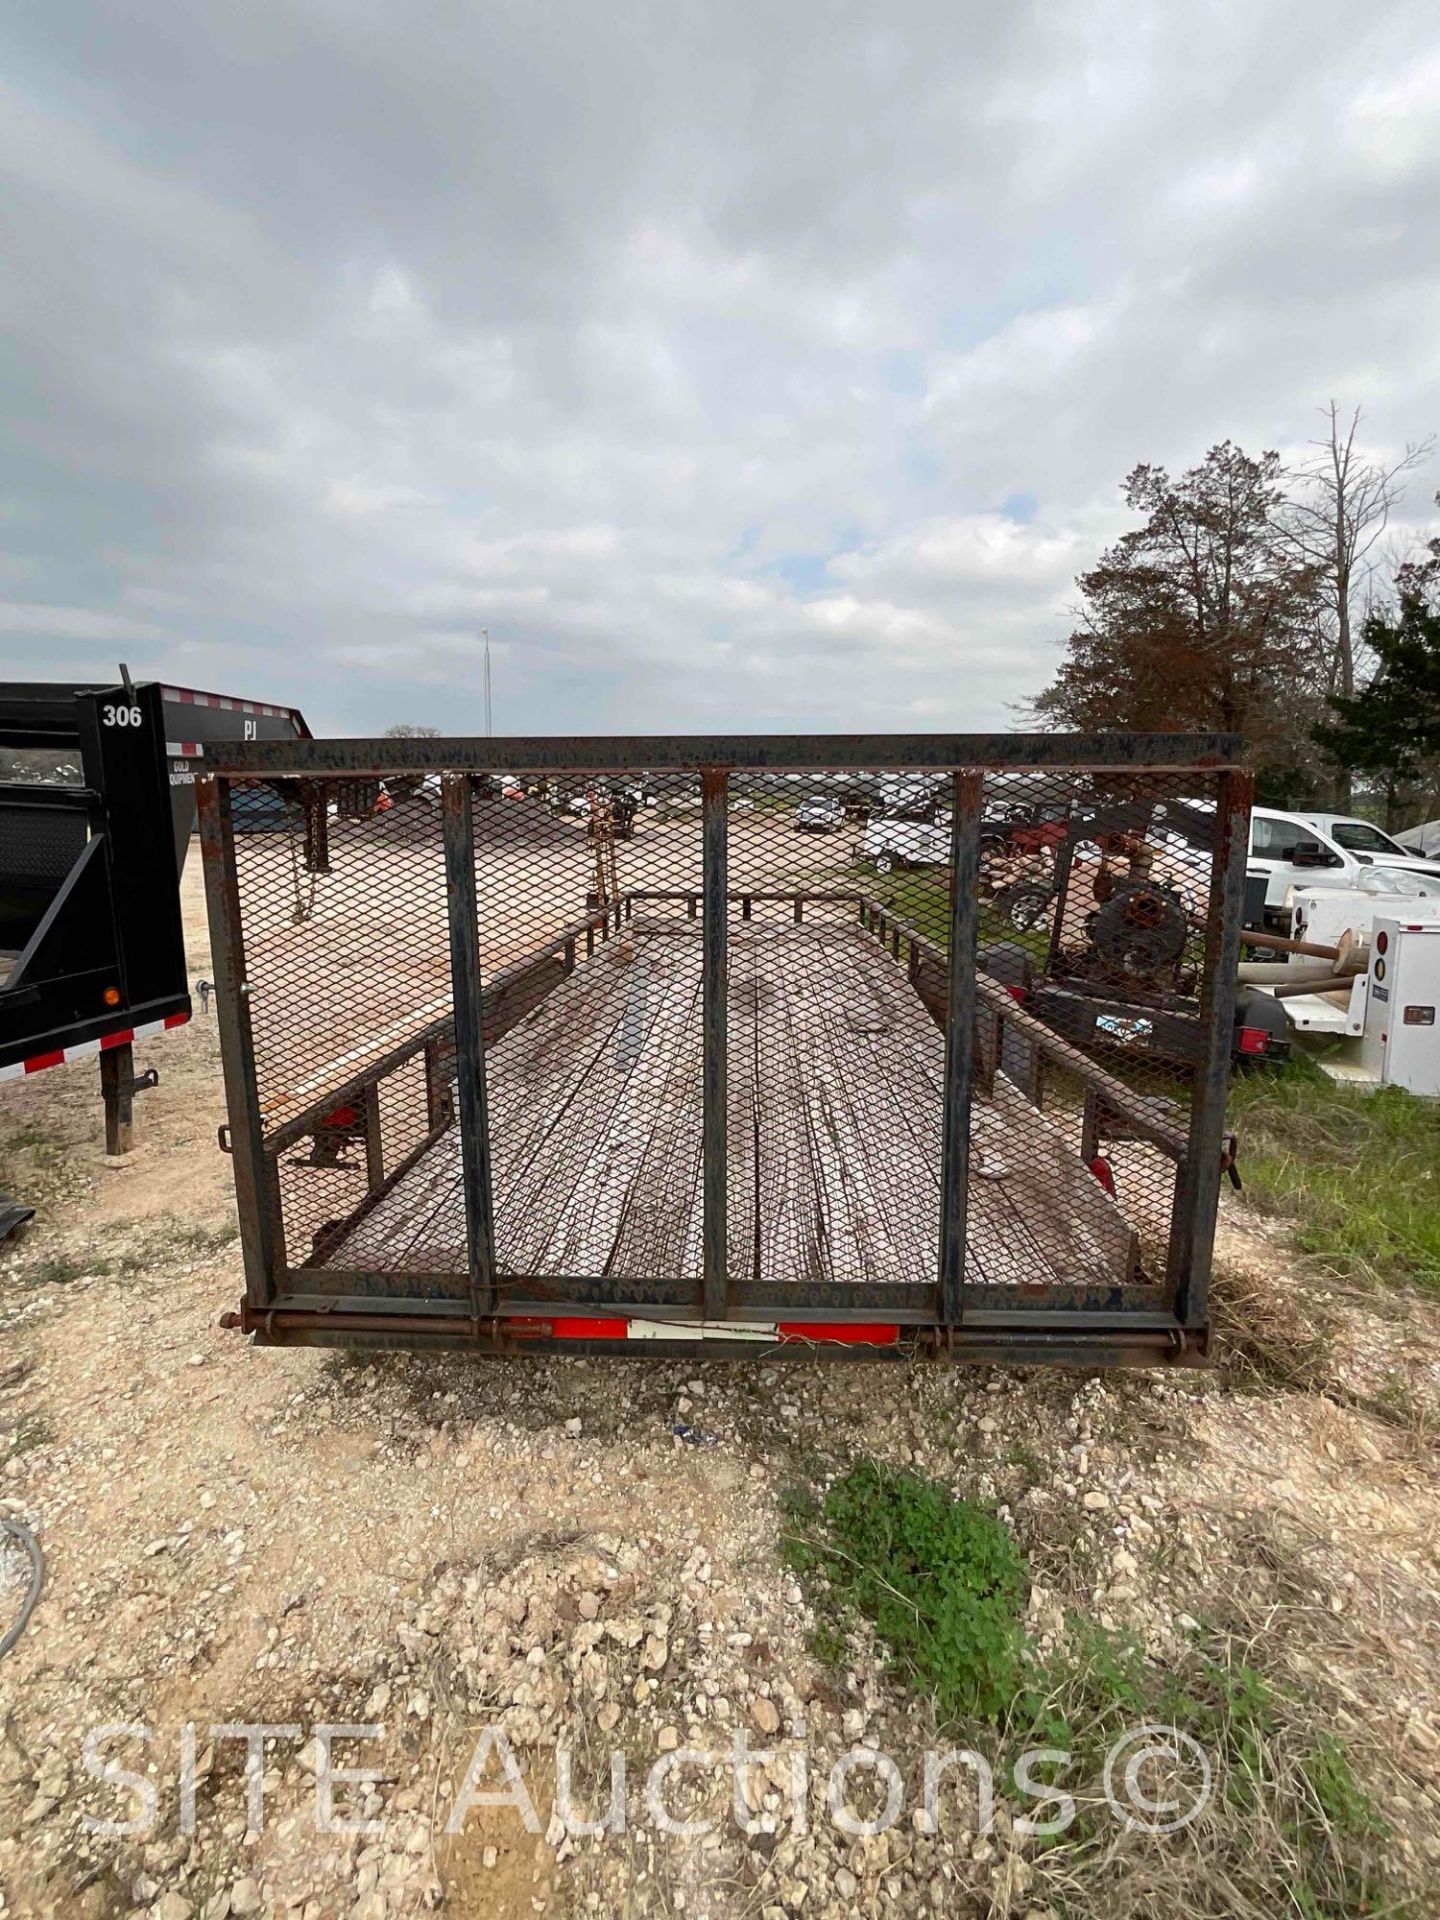 R&D T/A Flatbed Trailer - Image 5 of 10